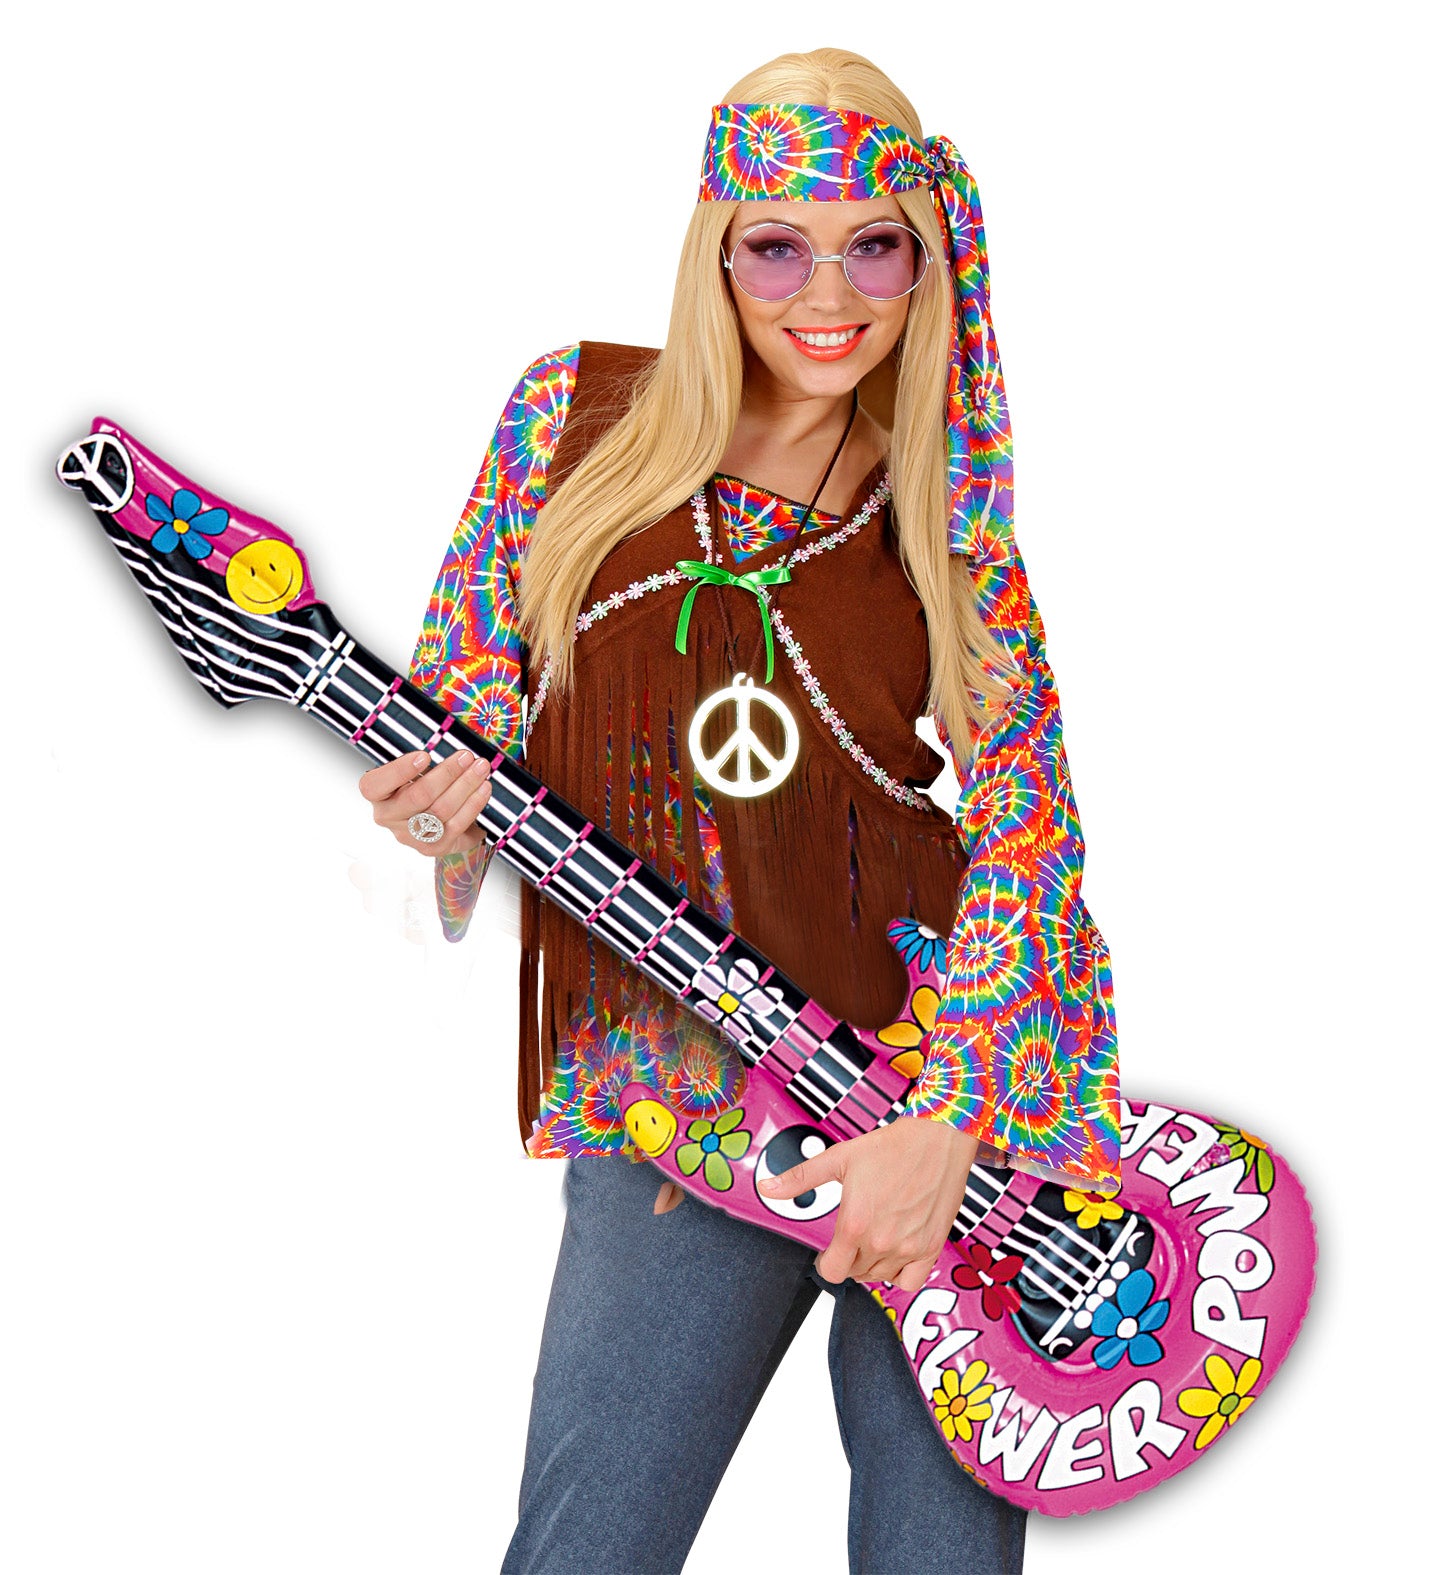 Hippie Inflatable Guitar party prop